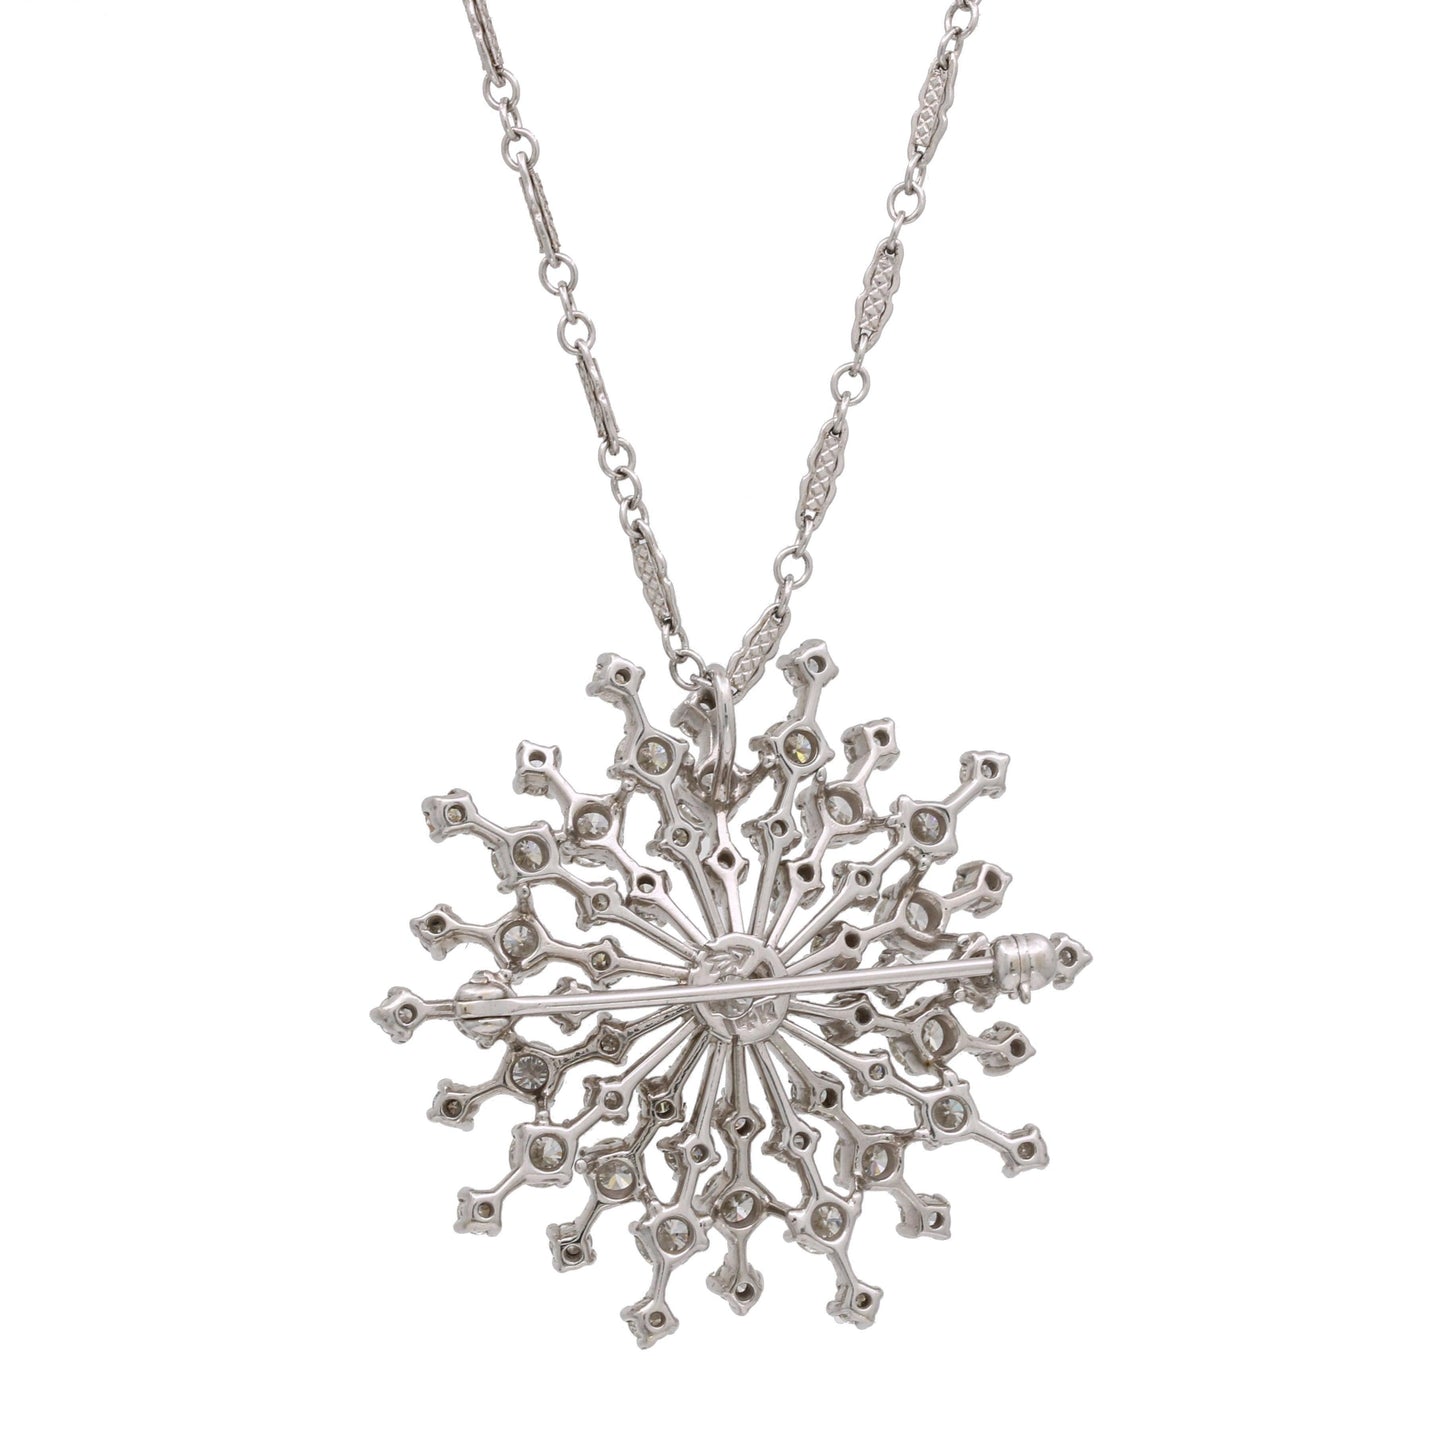 Diamond Starburst Brooch Pendant Necklace in 14k White Gold 3.95 cttw - 31 Jewels Inc.